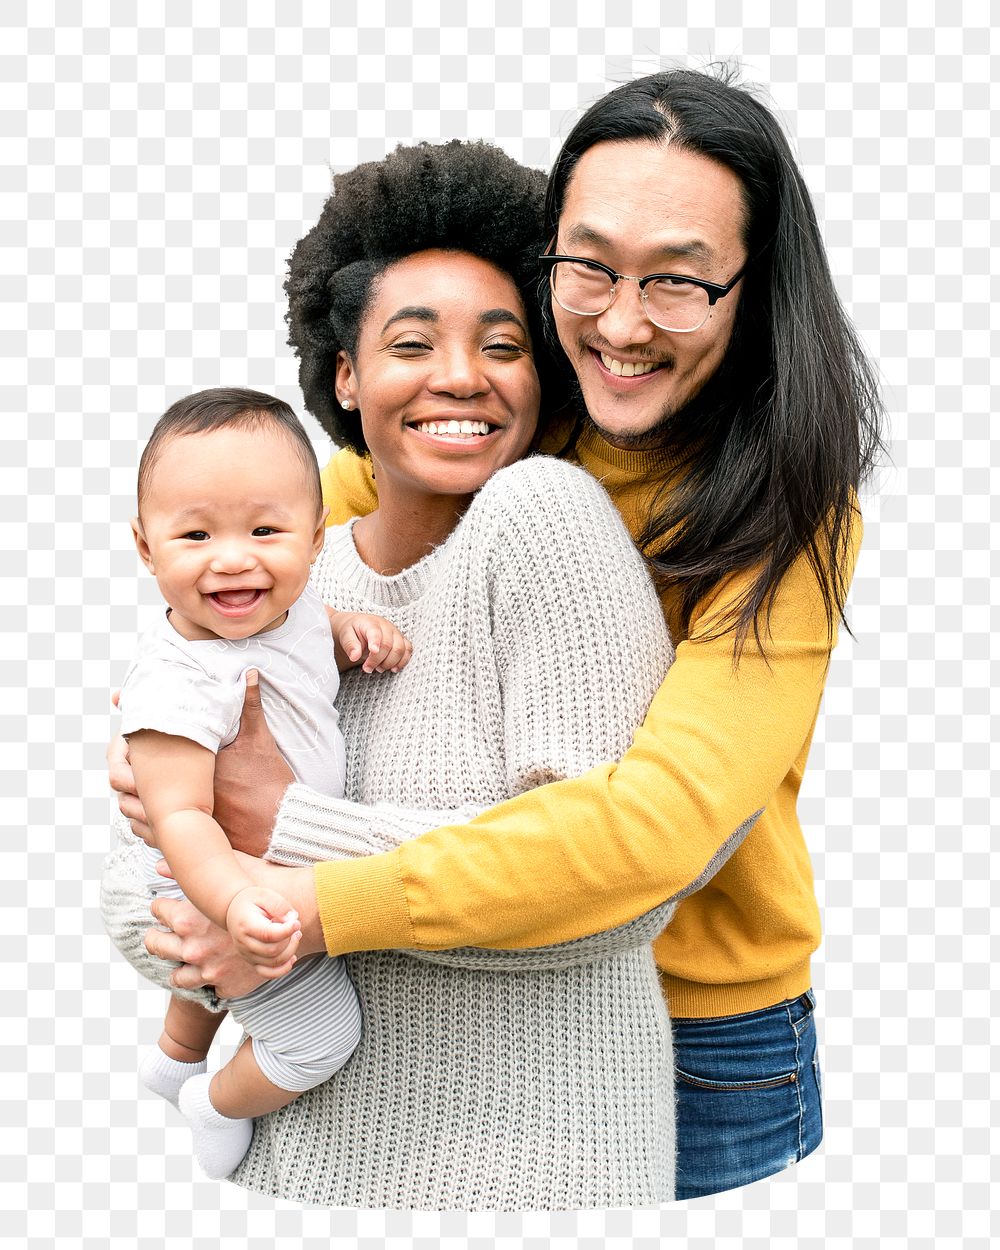 Diverse family png collage element, transparent background